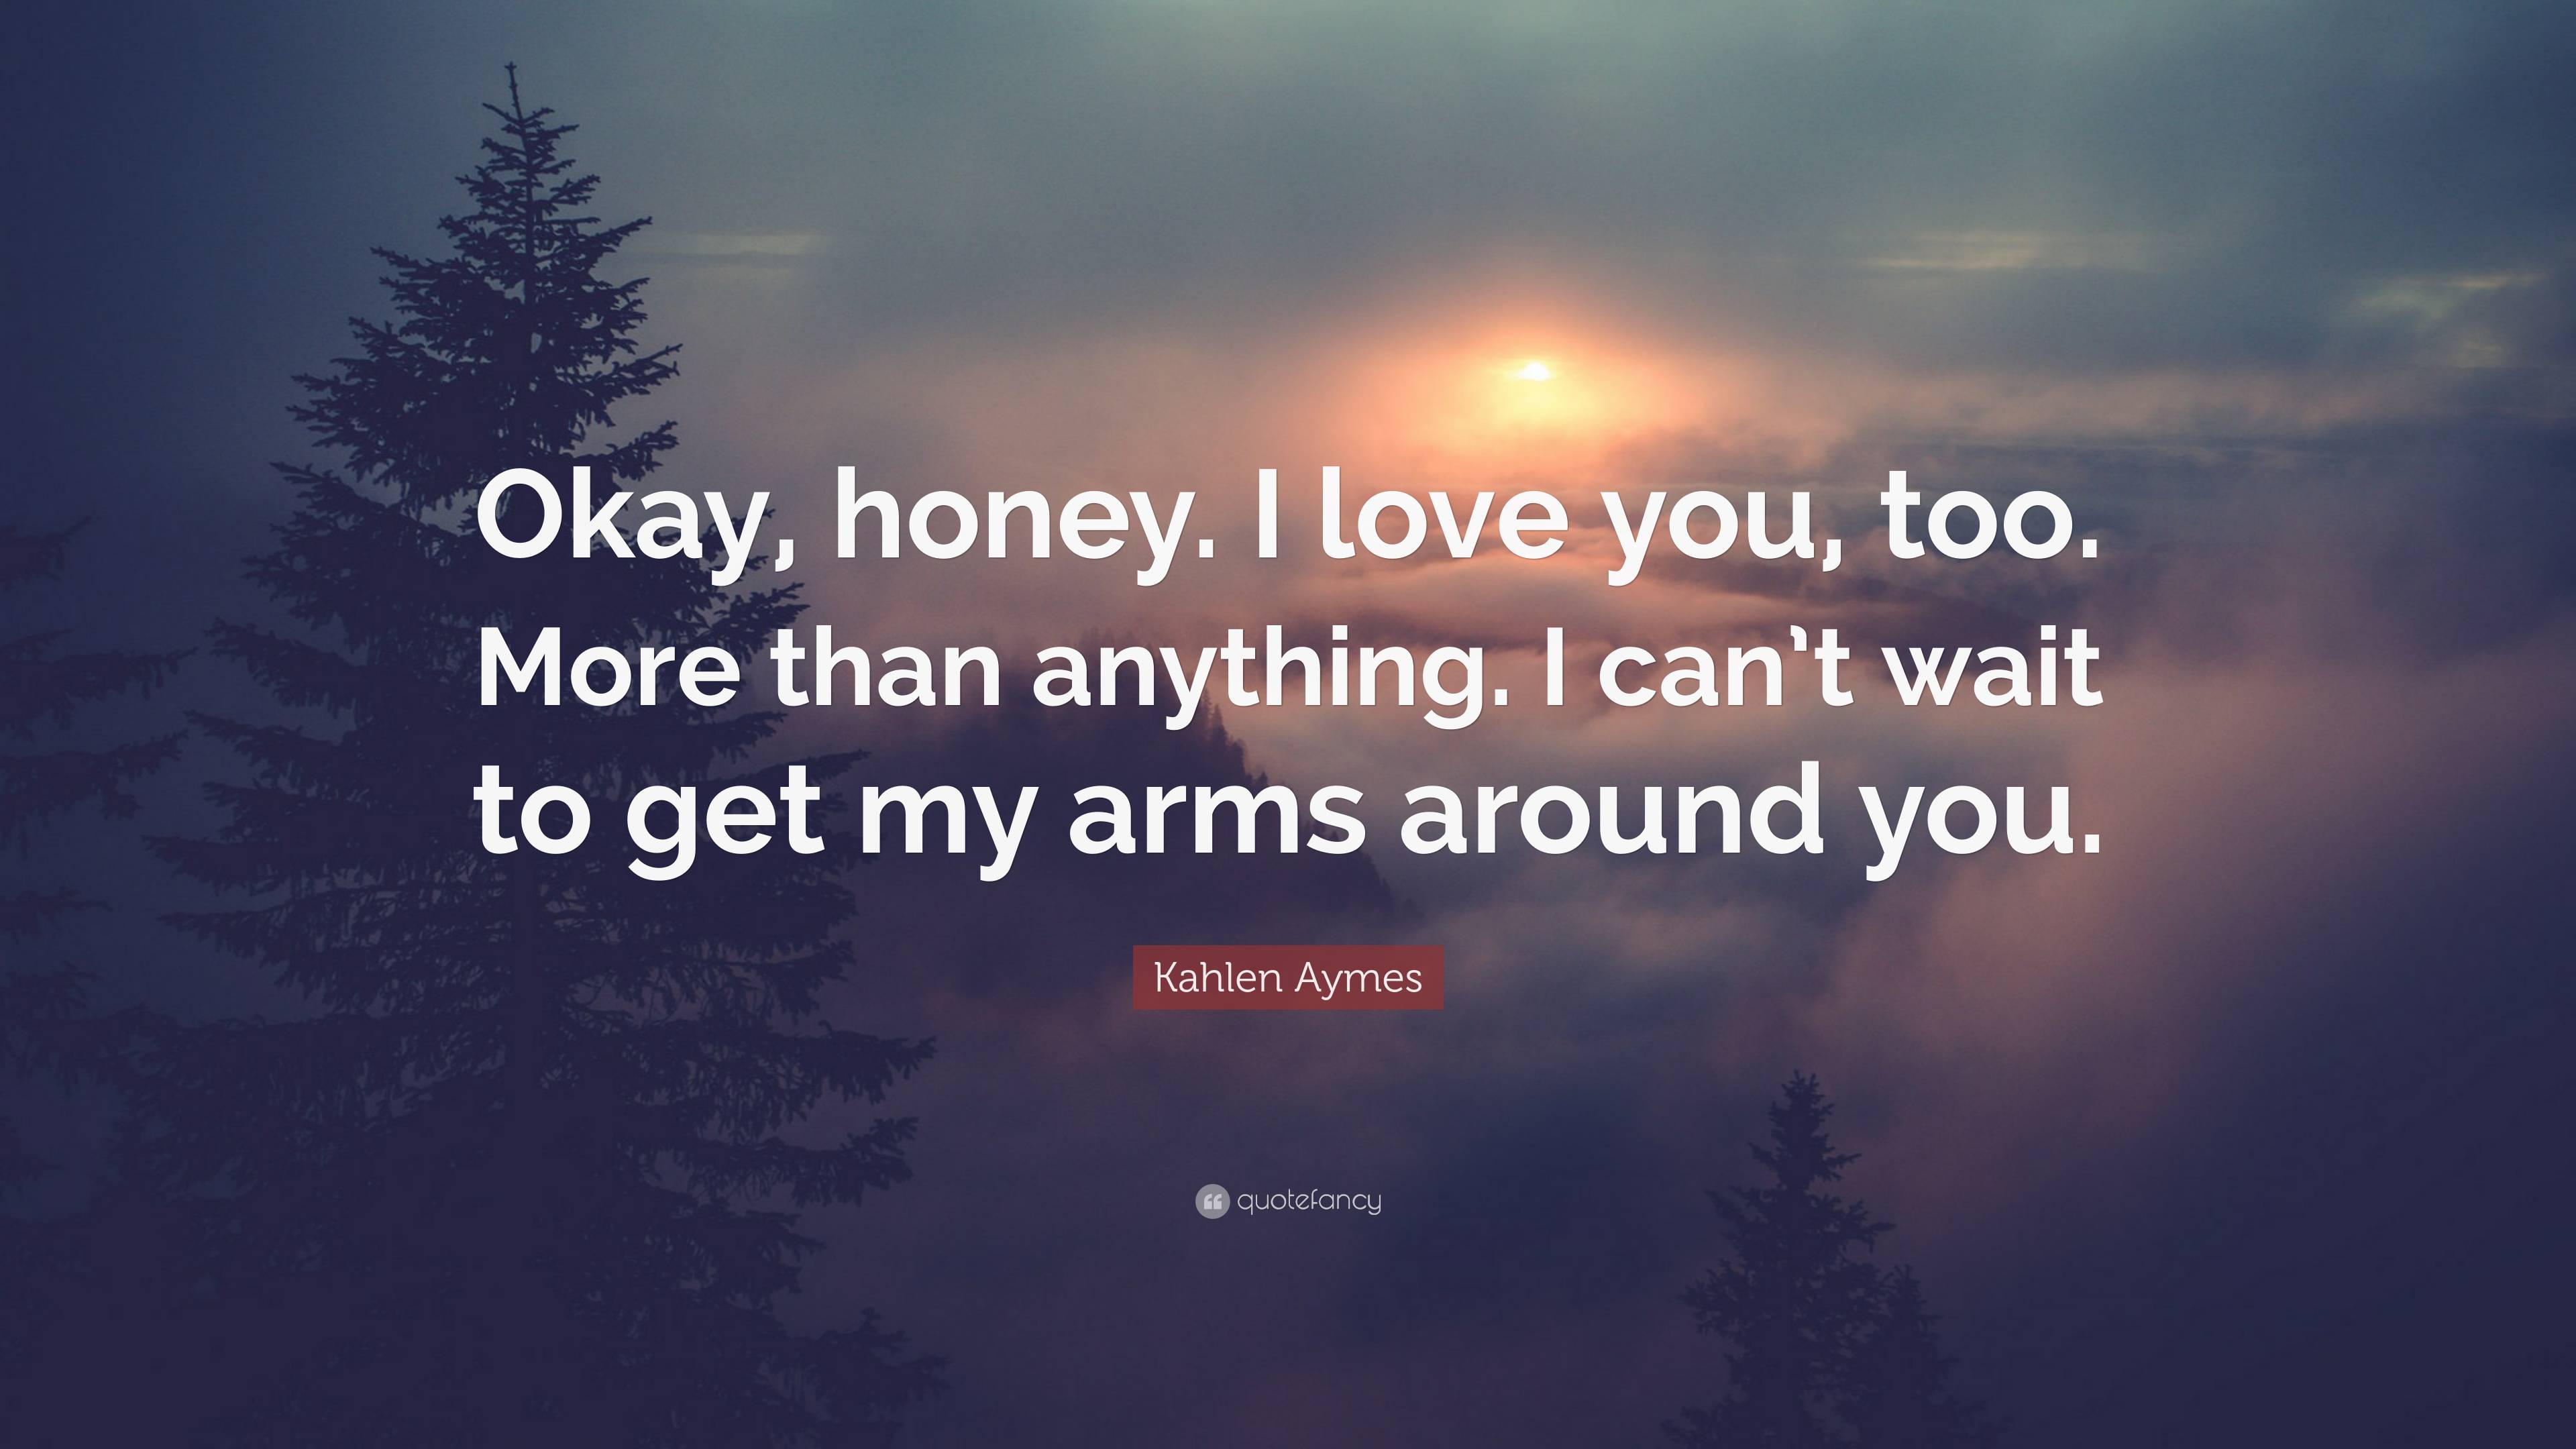 Kahlen Aymes Quote: “Okay, honey. I love you, too. More than anything. I  can't wait